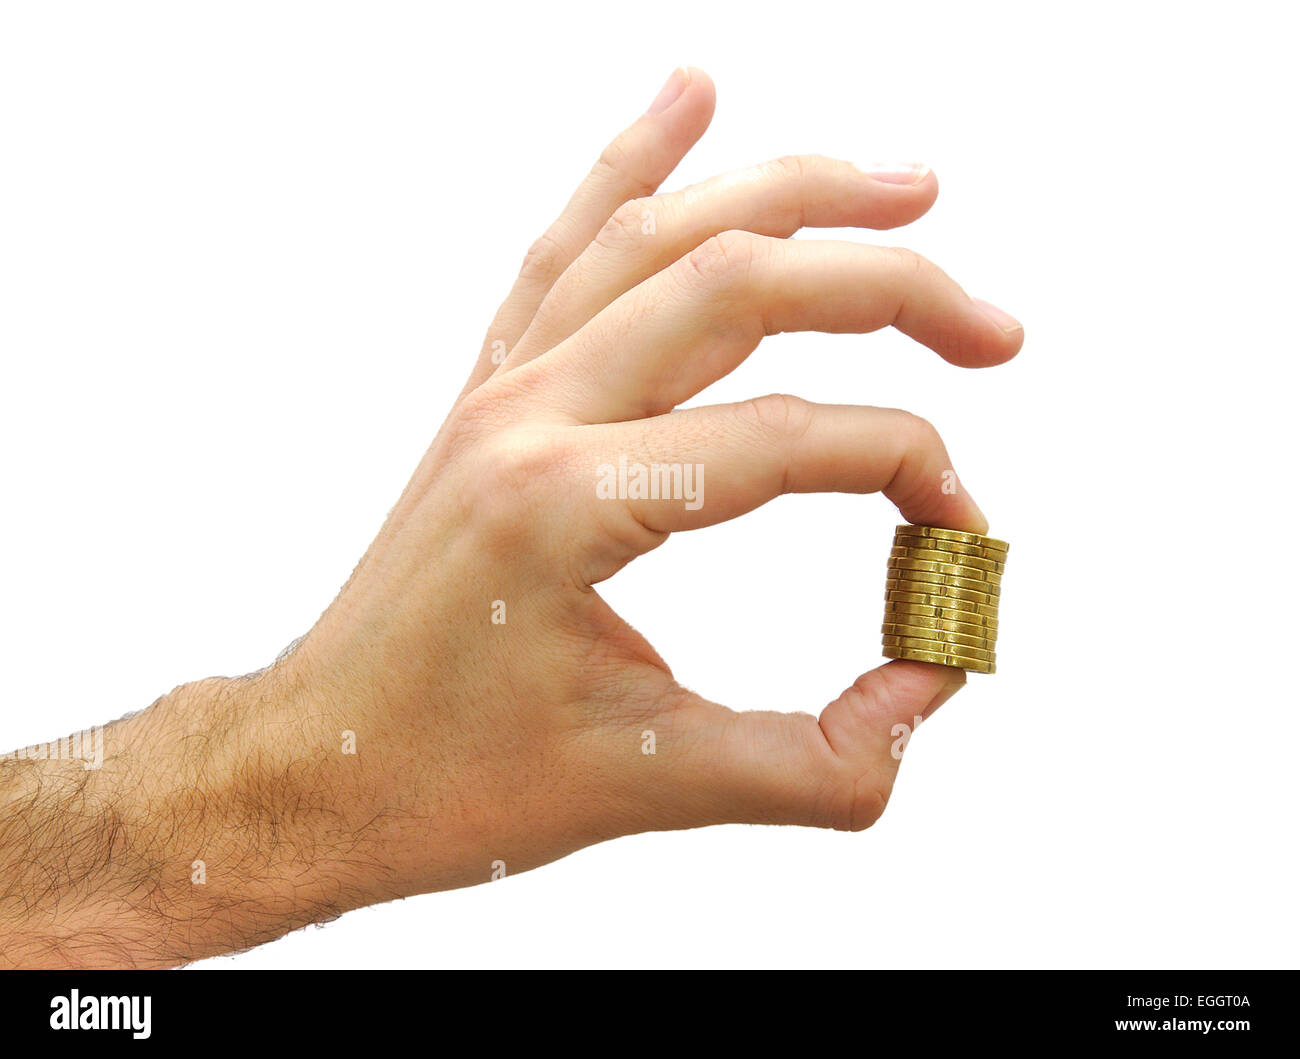 Caucasian hand holding some euro coins isolated on white background Stock Photo